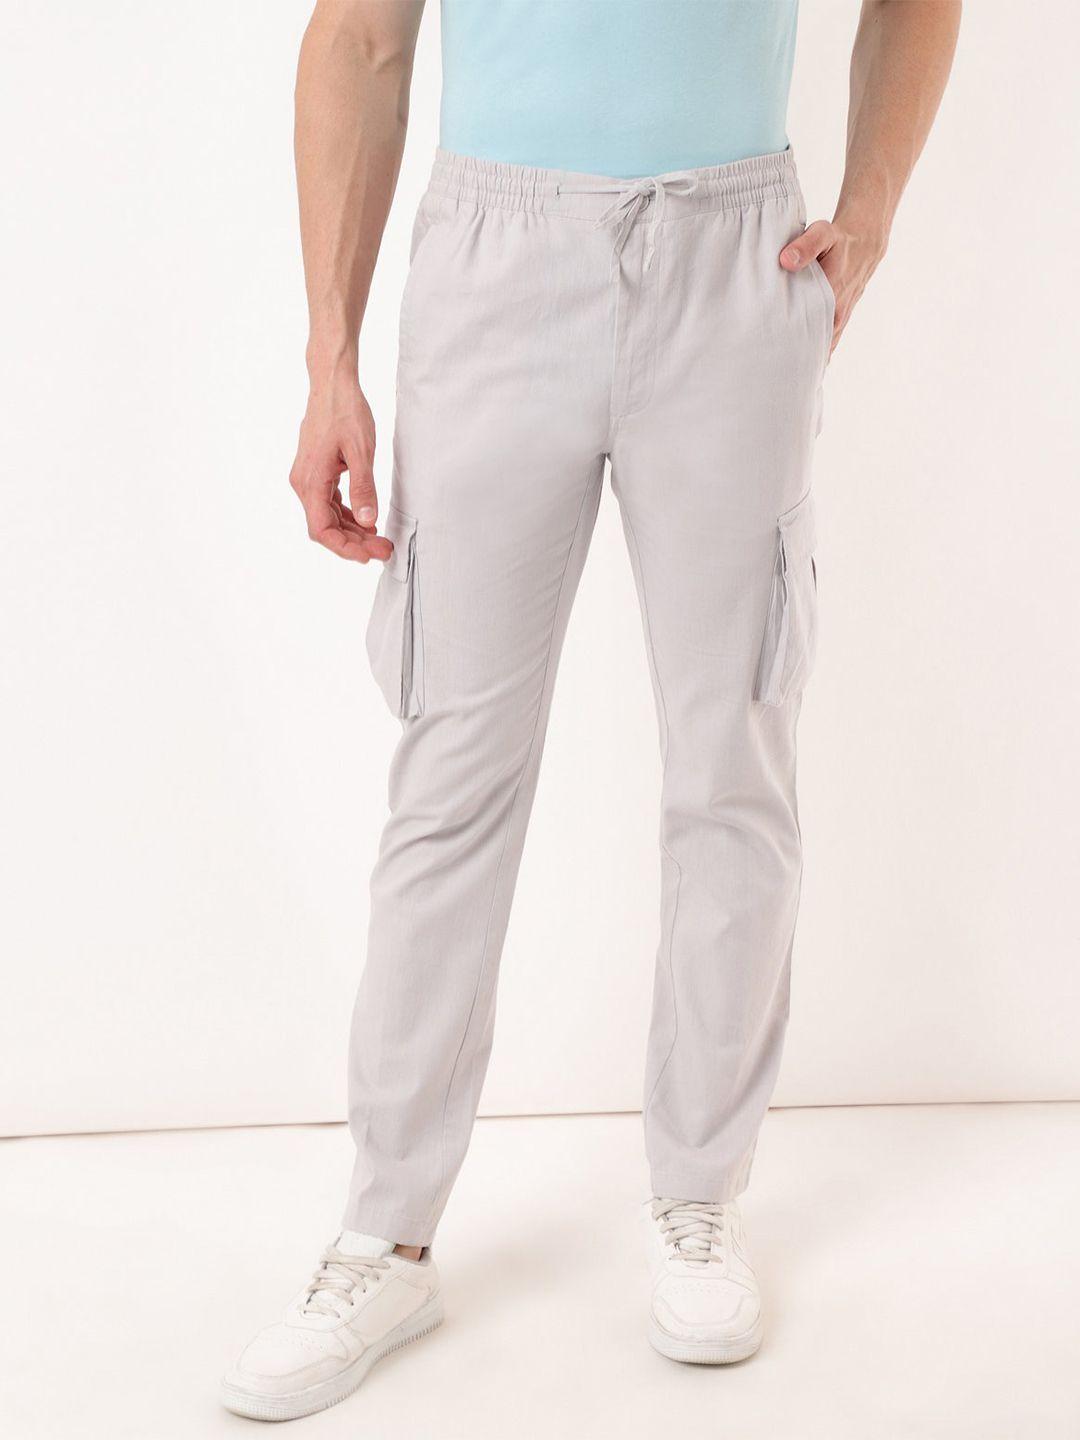 marks-&-spencer-men-grey-high-rise-pleated-trousers